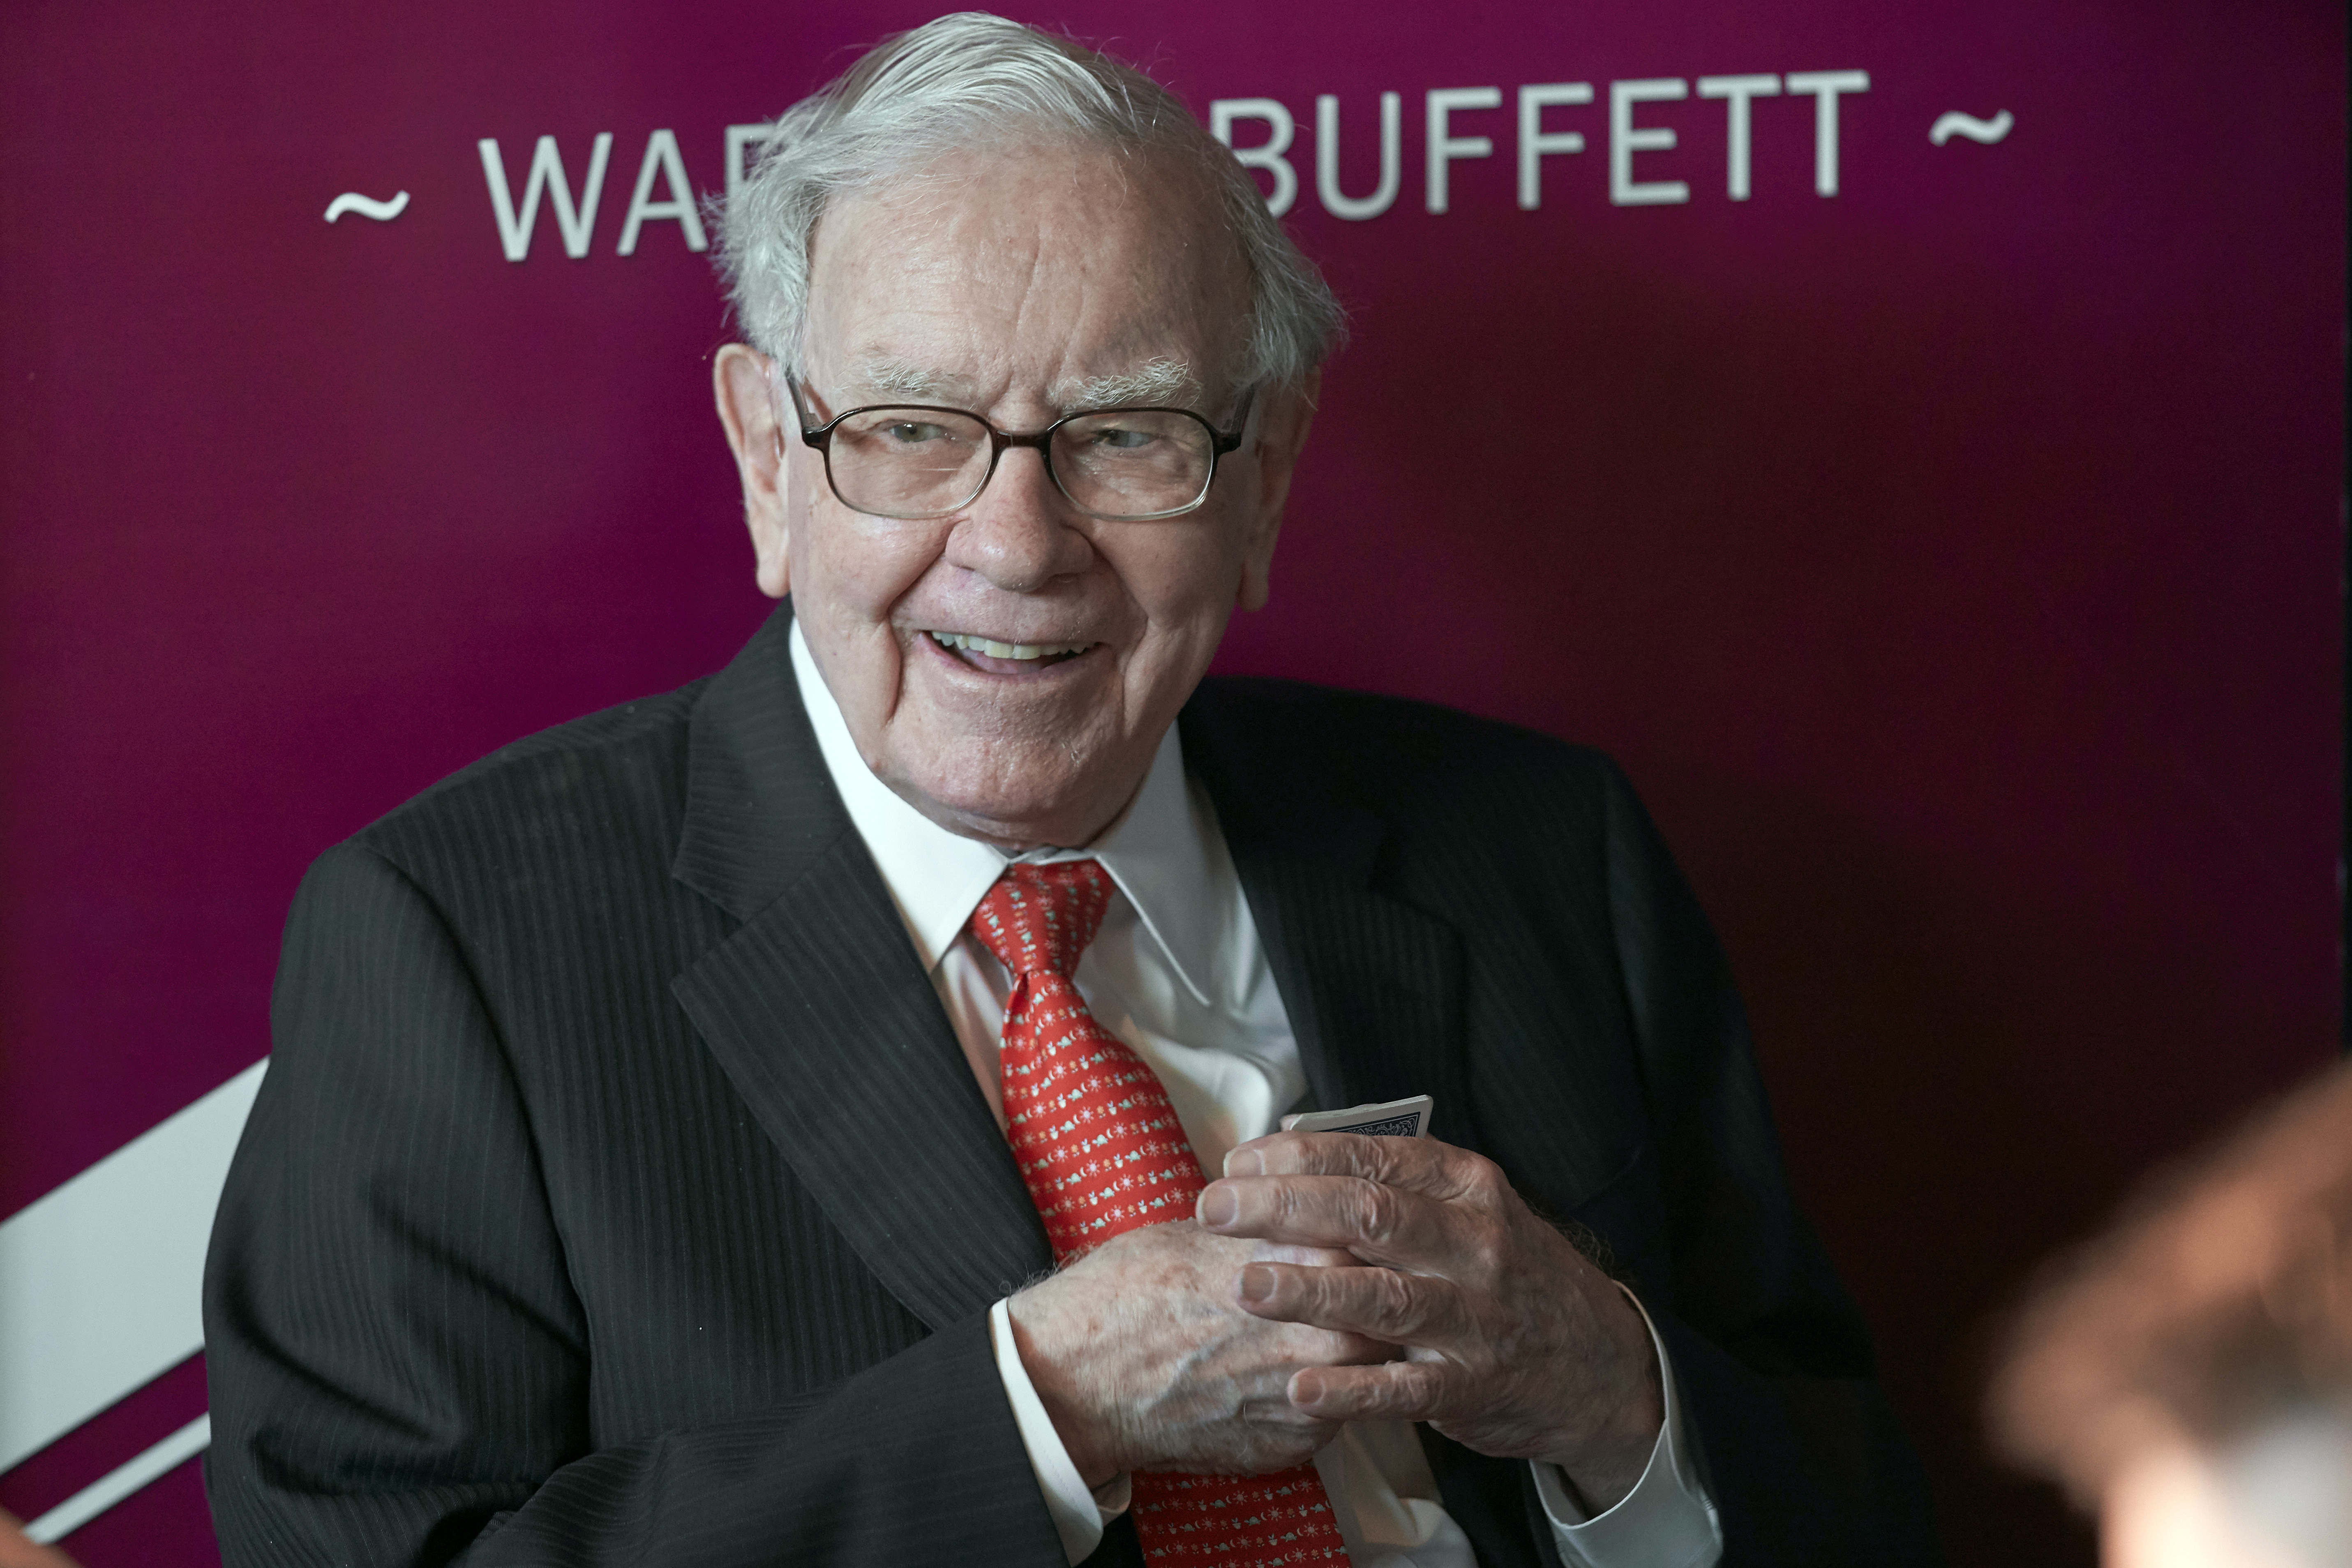 FILE - Warren Buffett, chairman and CEO of Berkshire Hathaway, smiles as he plays bridge following the annual Berkshire Hathaway shareholders meeting in Omaha, Neb., May 5, 2019. Buffett is giving away another $5.3 billion worth of Berkshire Hathaway stock to five foundations in accordance with his longtime giving plan. (AP Photo/Nati Harnik, File)